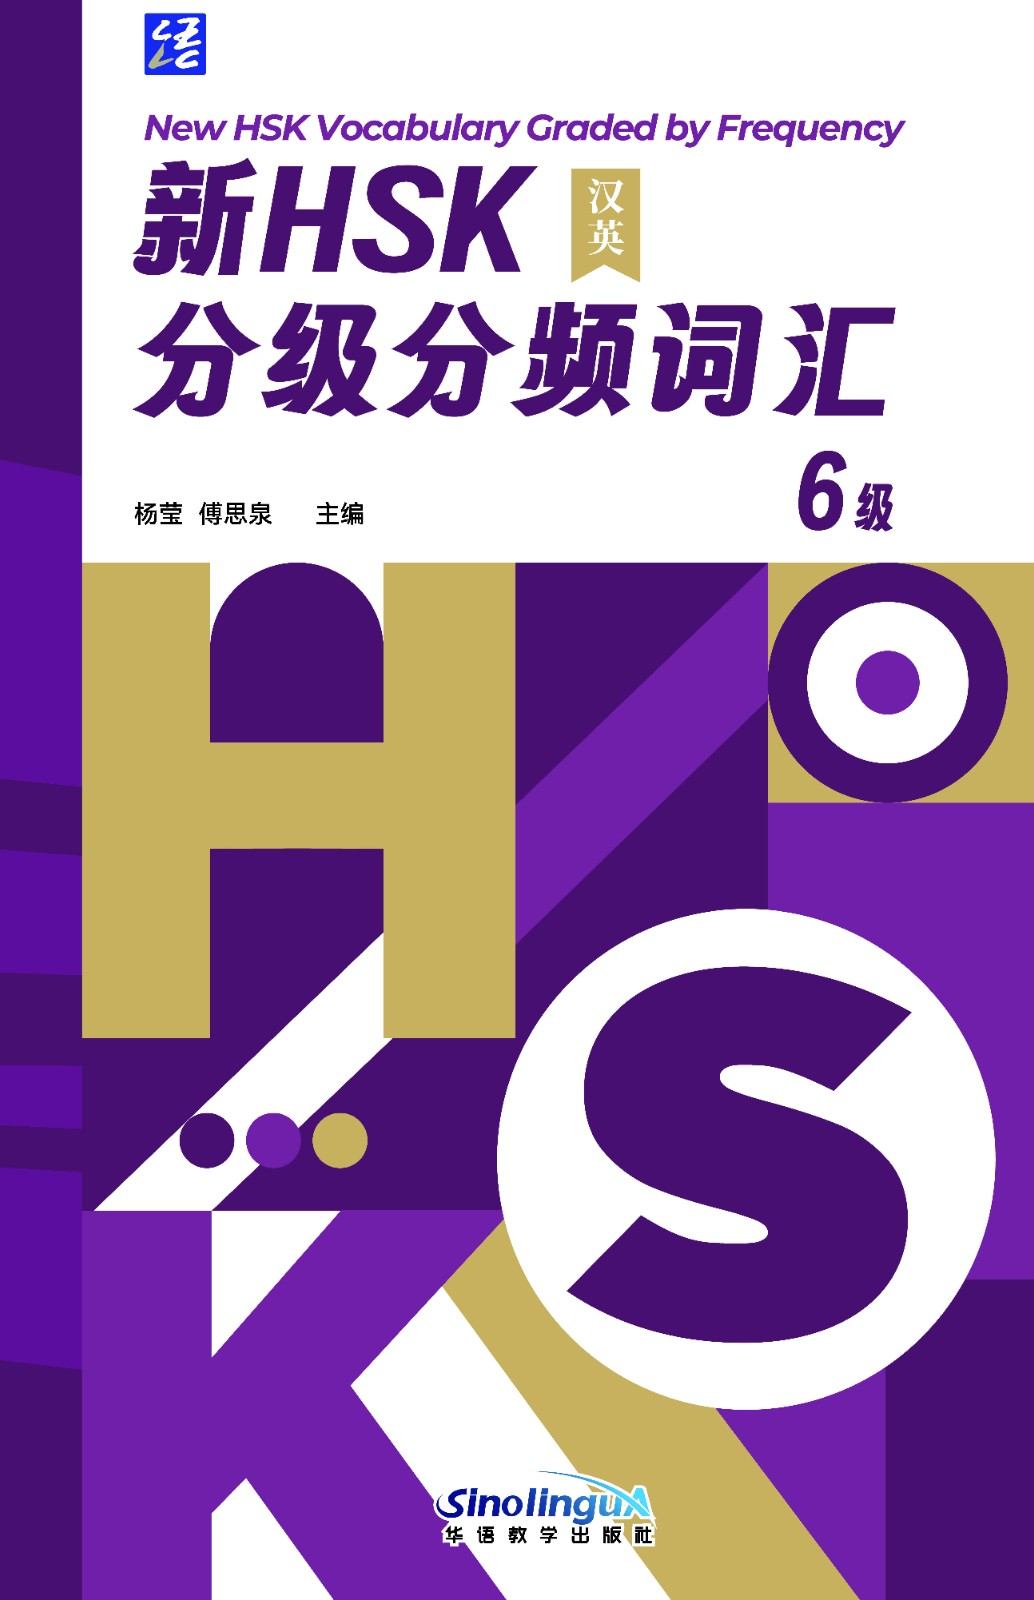 New HSK Vocabulary Graded by Frequency 6